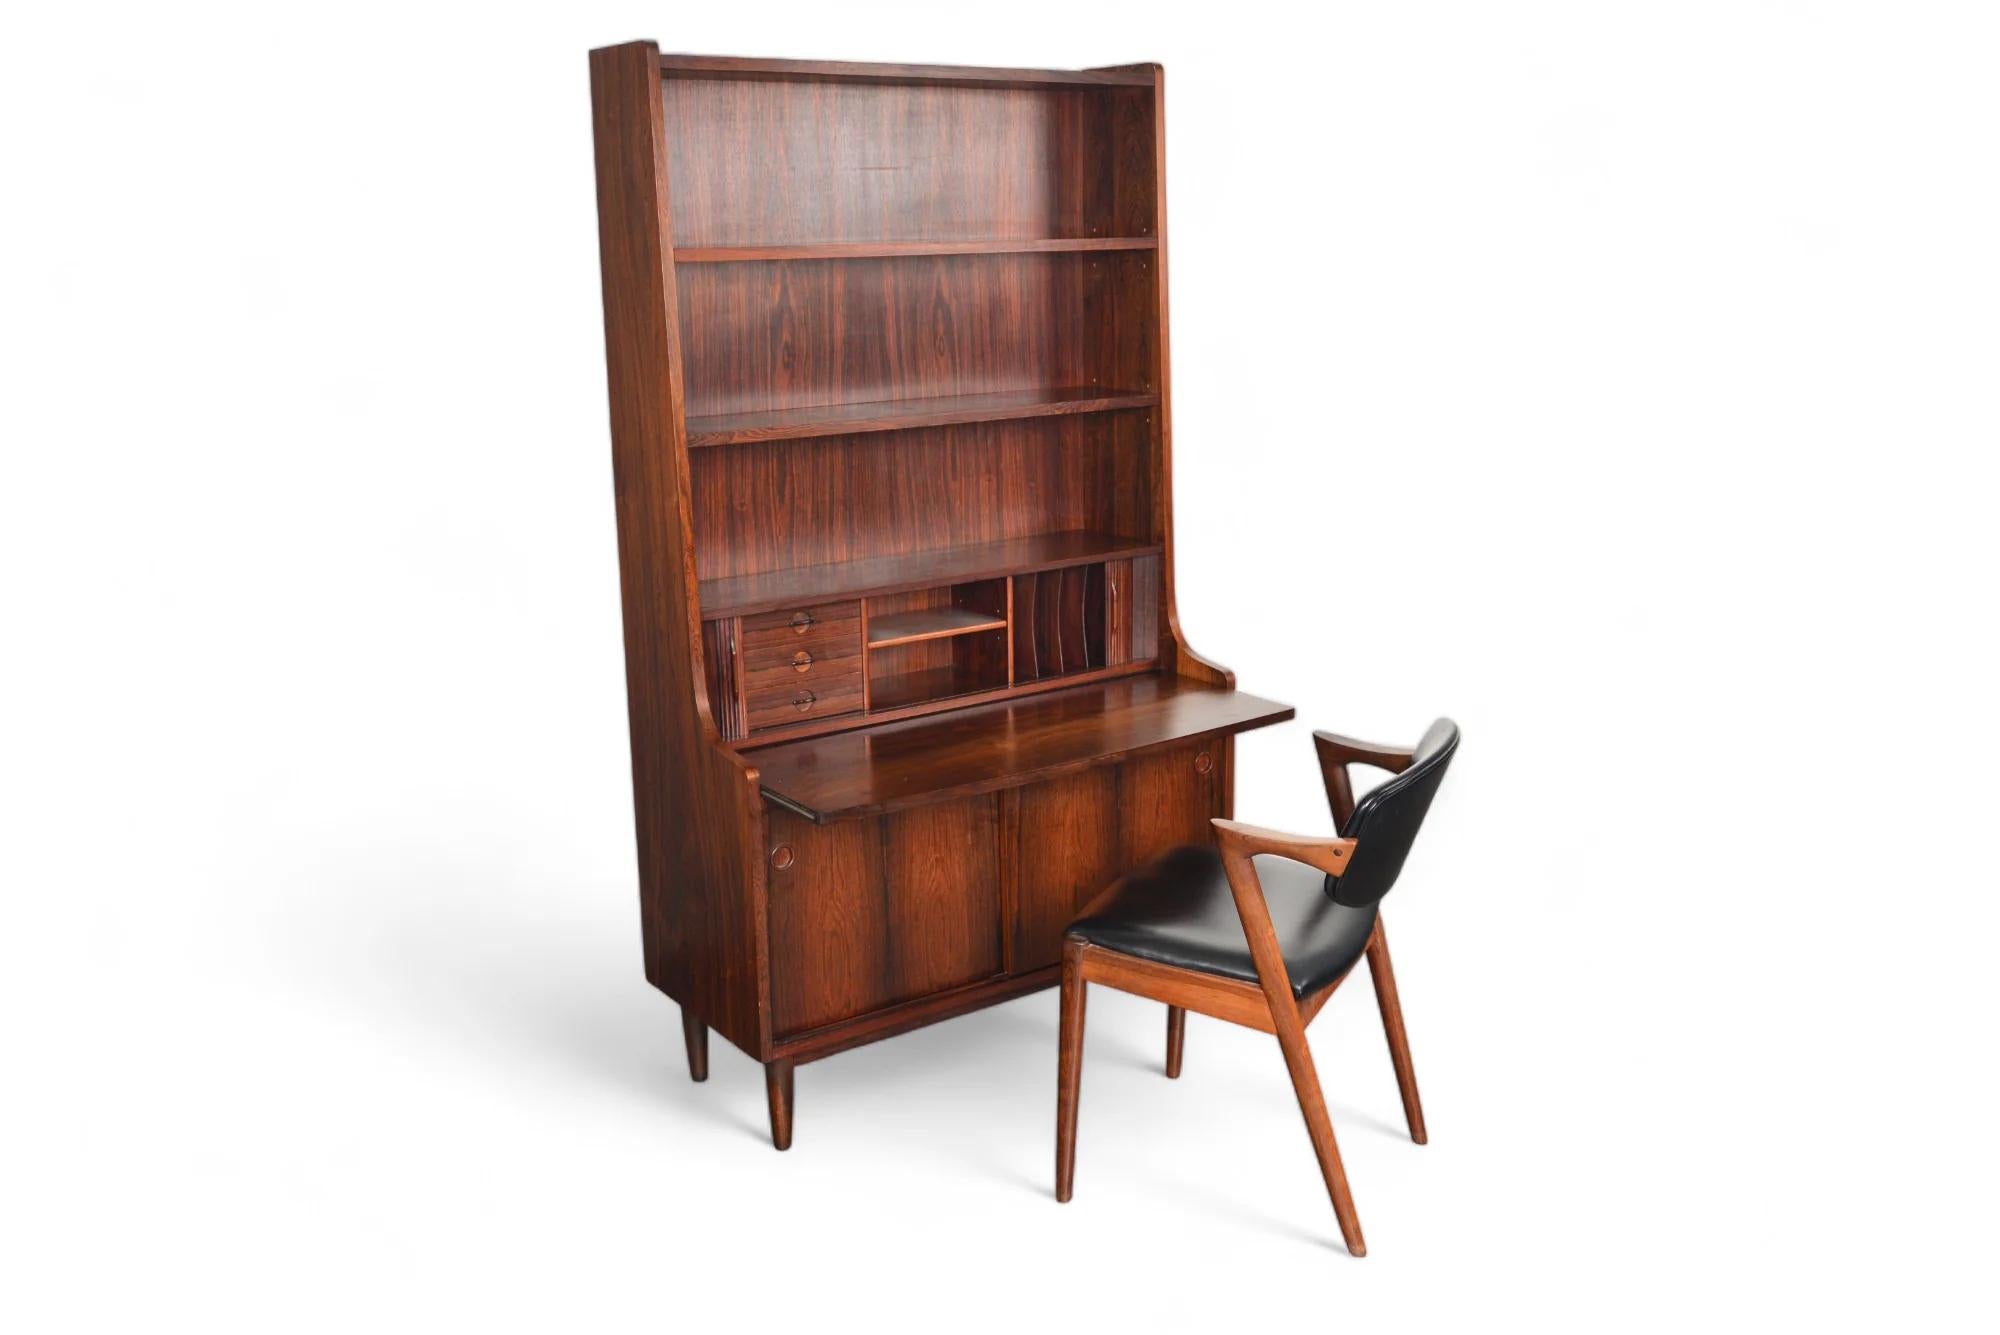 Origin: Denmark
Designer: Johannes Sorth
Manufacturer: Nexø / Bornholms
Era: 1960s
Materials: Rosewood
Measurements: 39.5″ wide x 17″ deep x 69.5″ tall

Condition: In excellent original condition with typical wear for its vintage.